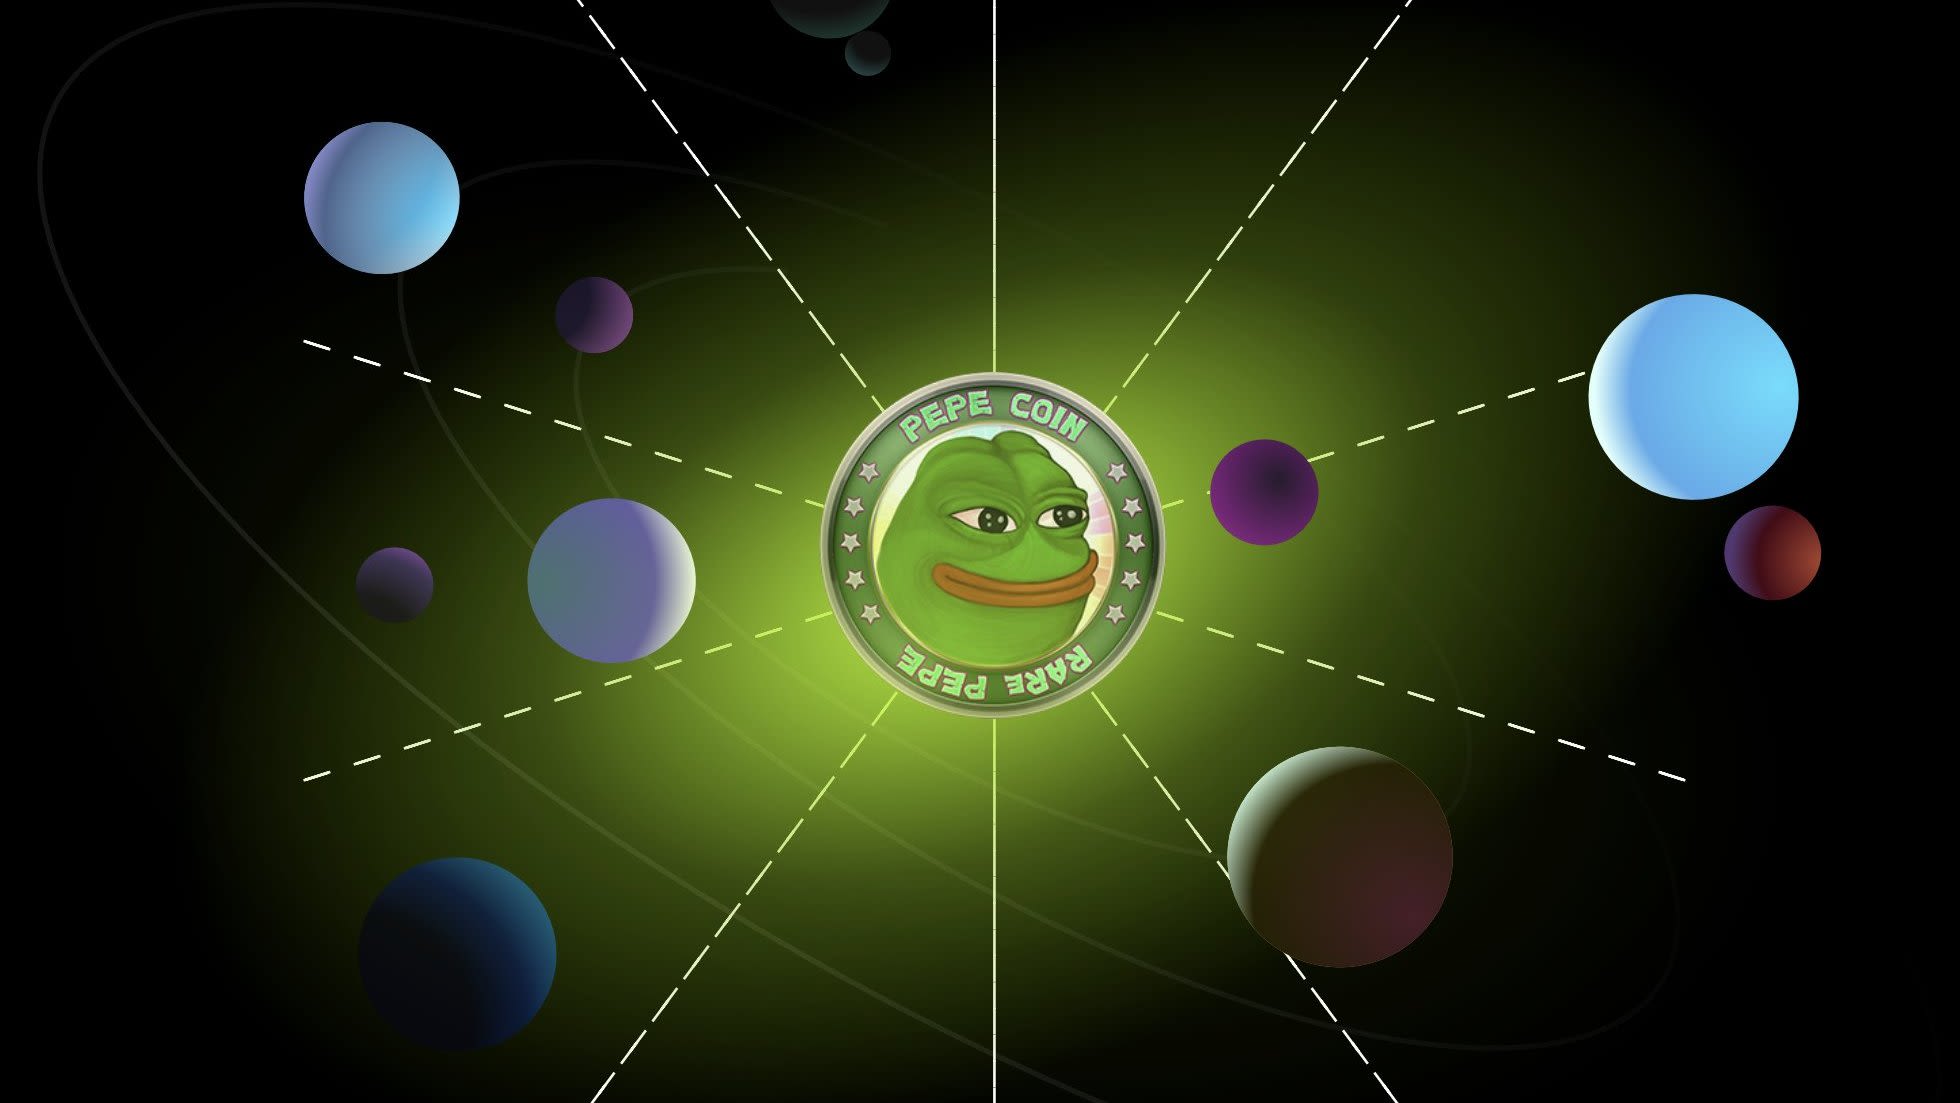 Pepe Price Prediction As PEPE Pumps 4% And An ETH Whale Sends Over $183K To This New Cross-Chain Meme Coin ICO